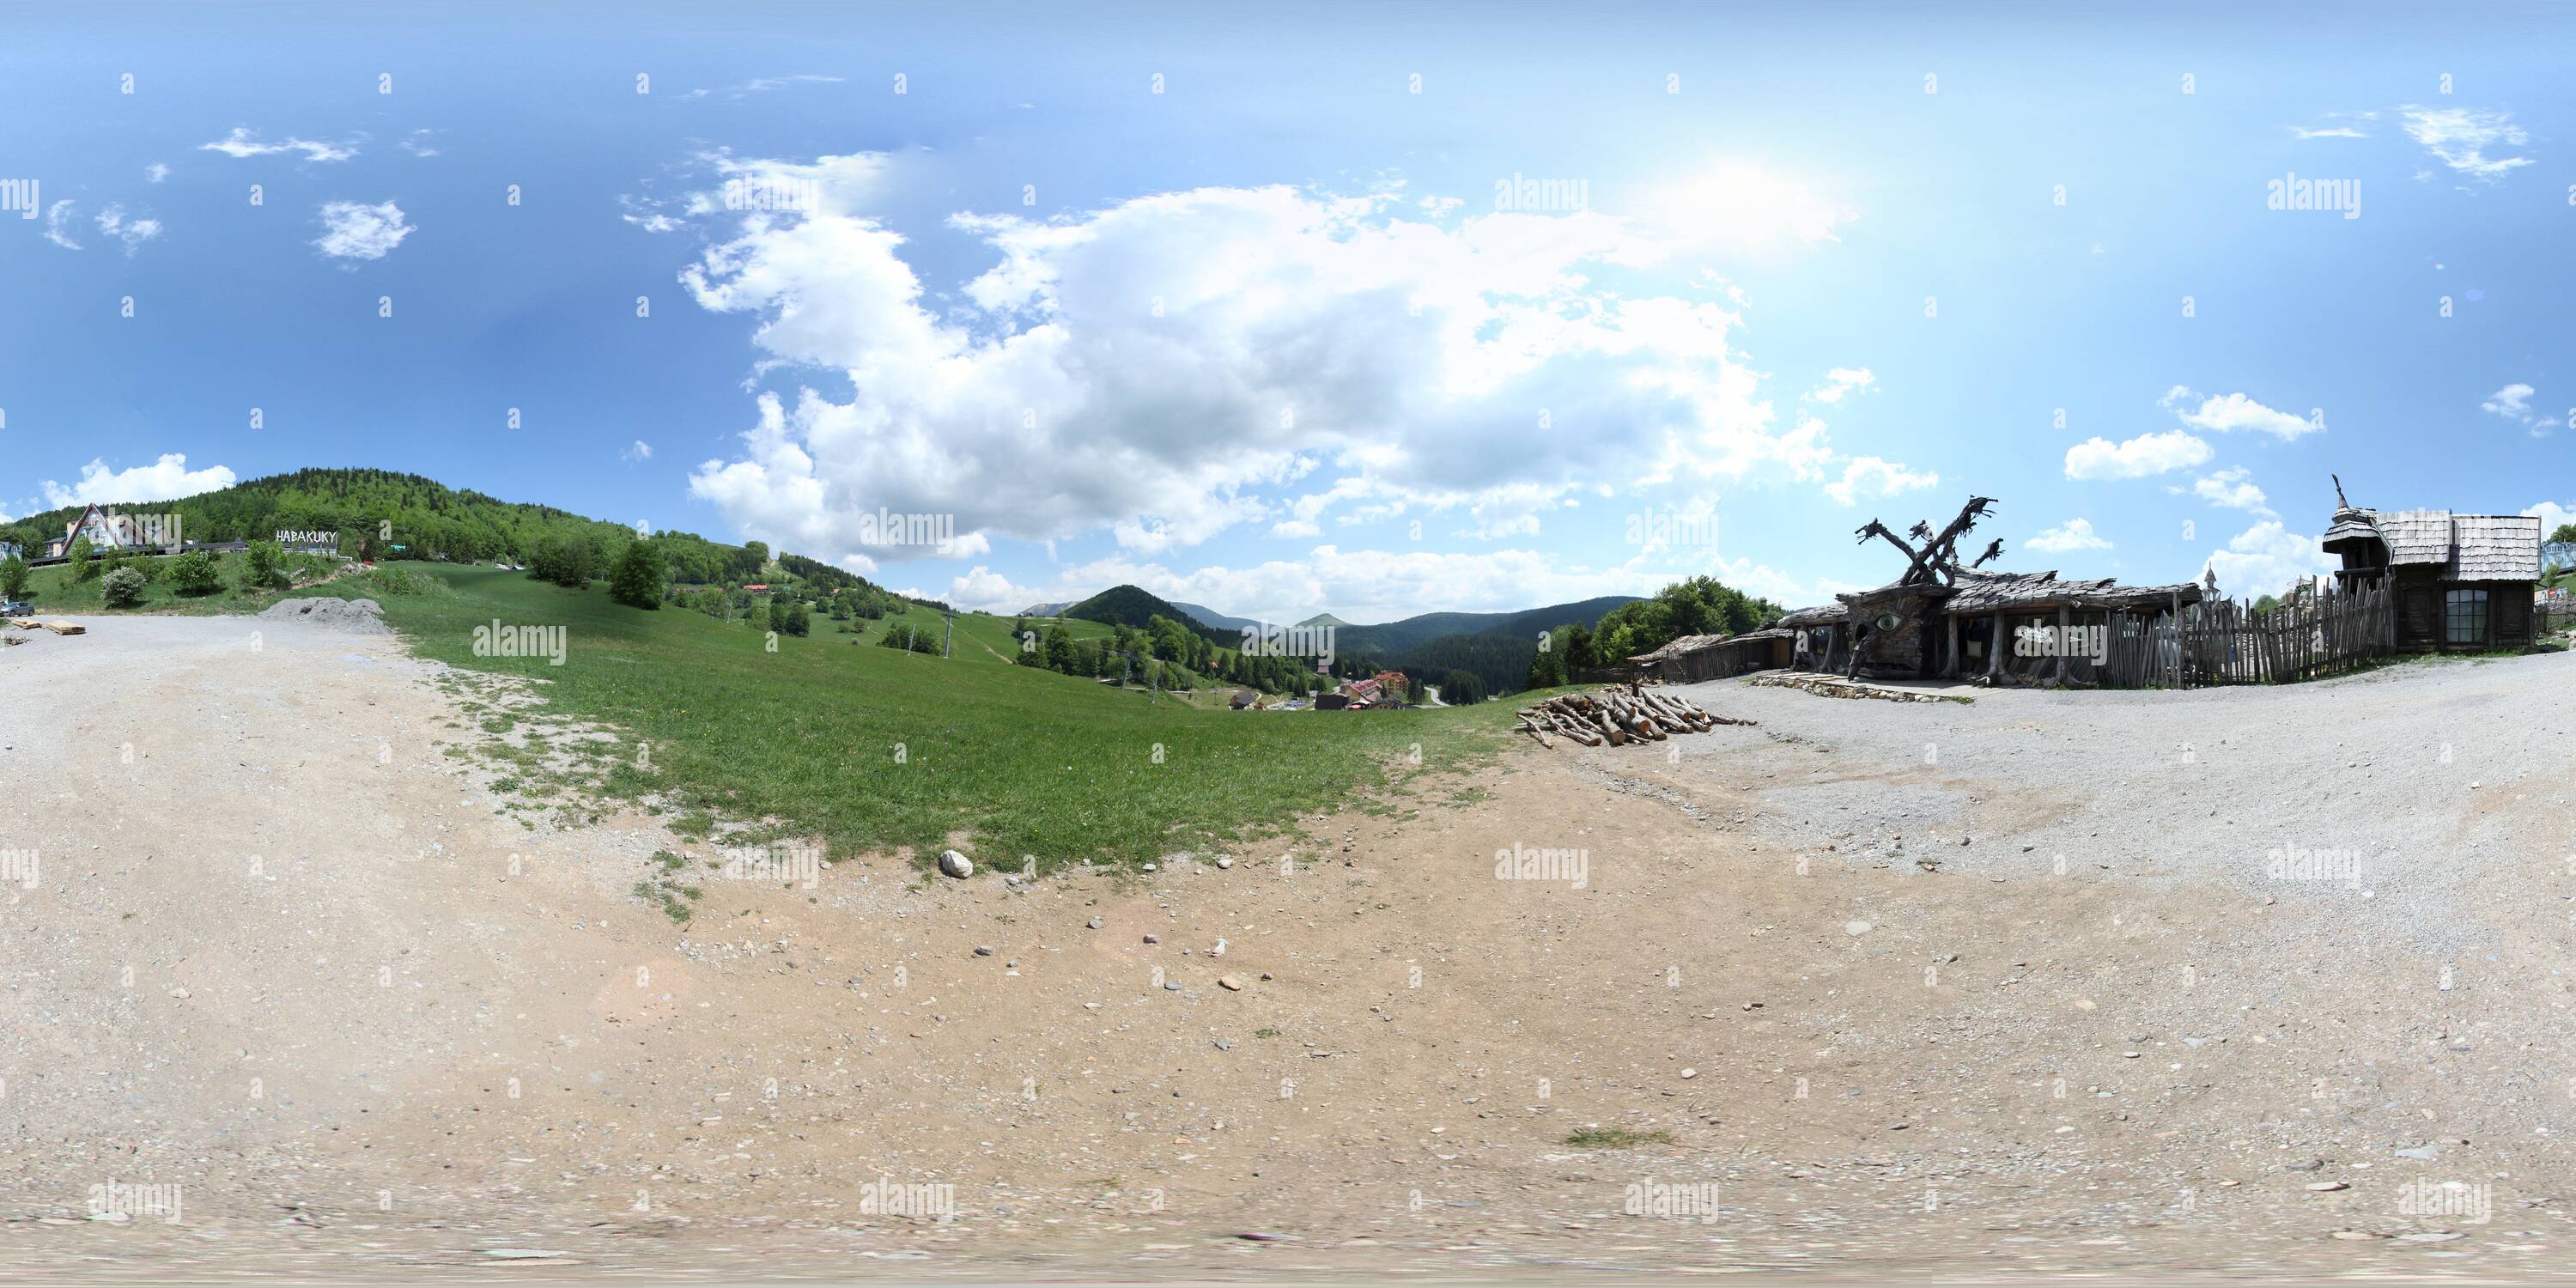 360 degree panoramic view of Donovaly - Habakuky